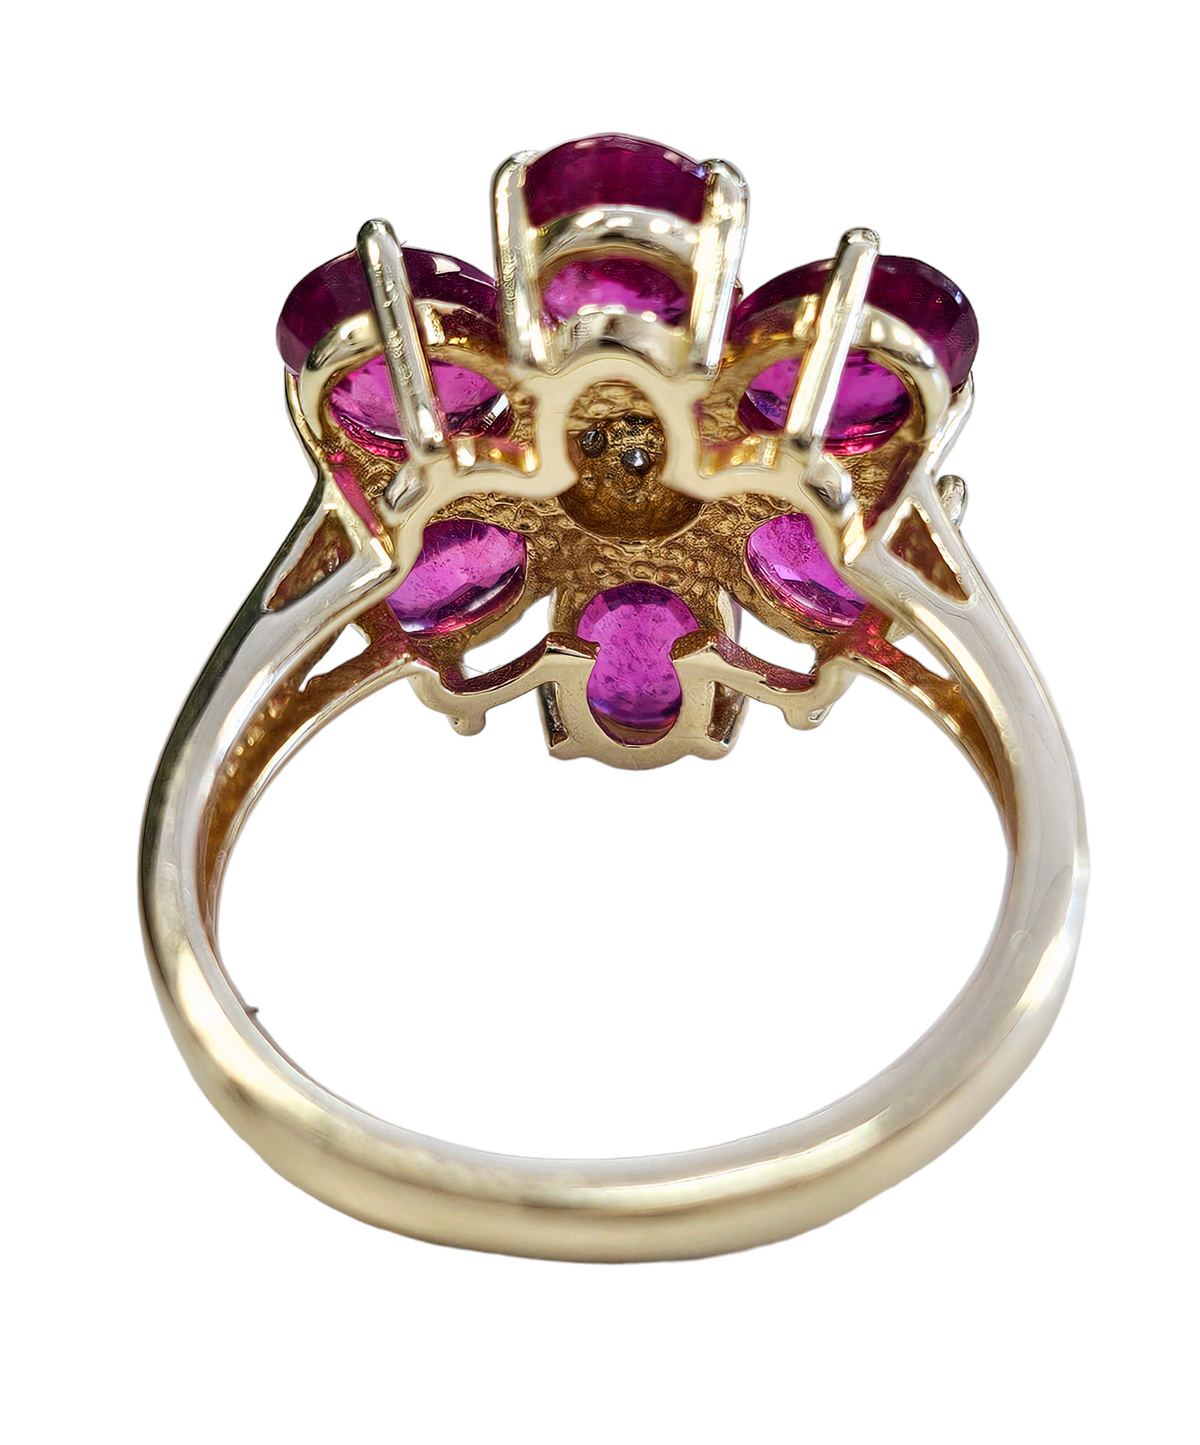 Diamond and Synthetic Oval Ruby Floral Design Ring made in 14-Karat Yellow Gold